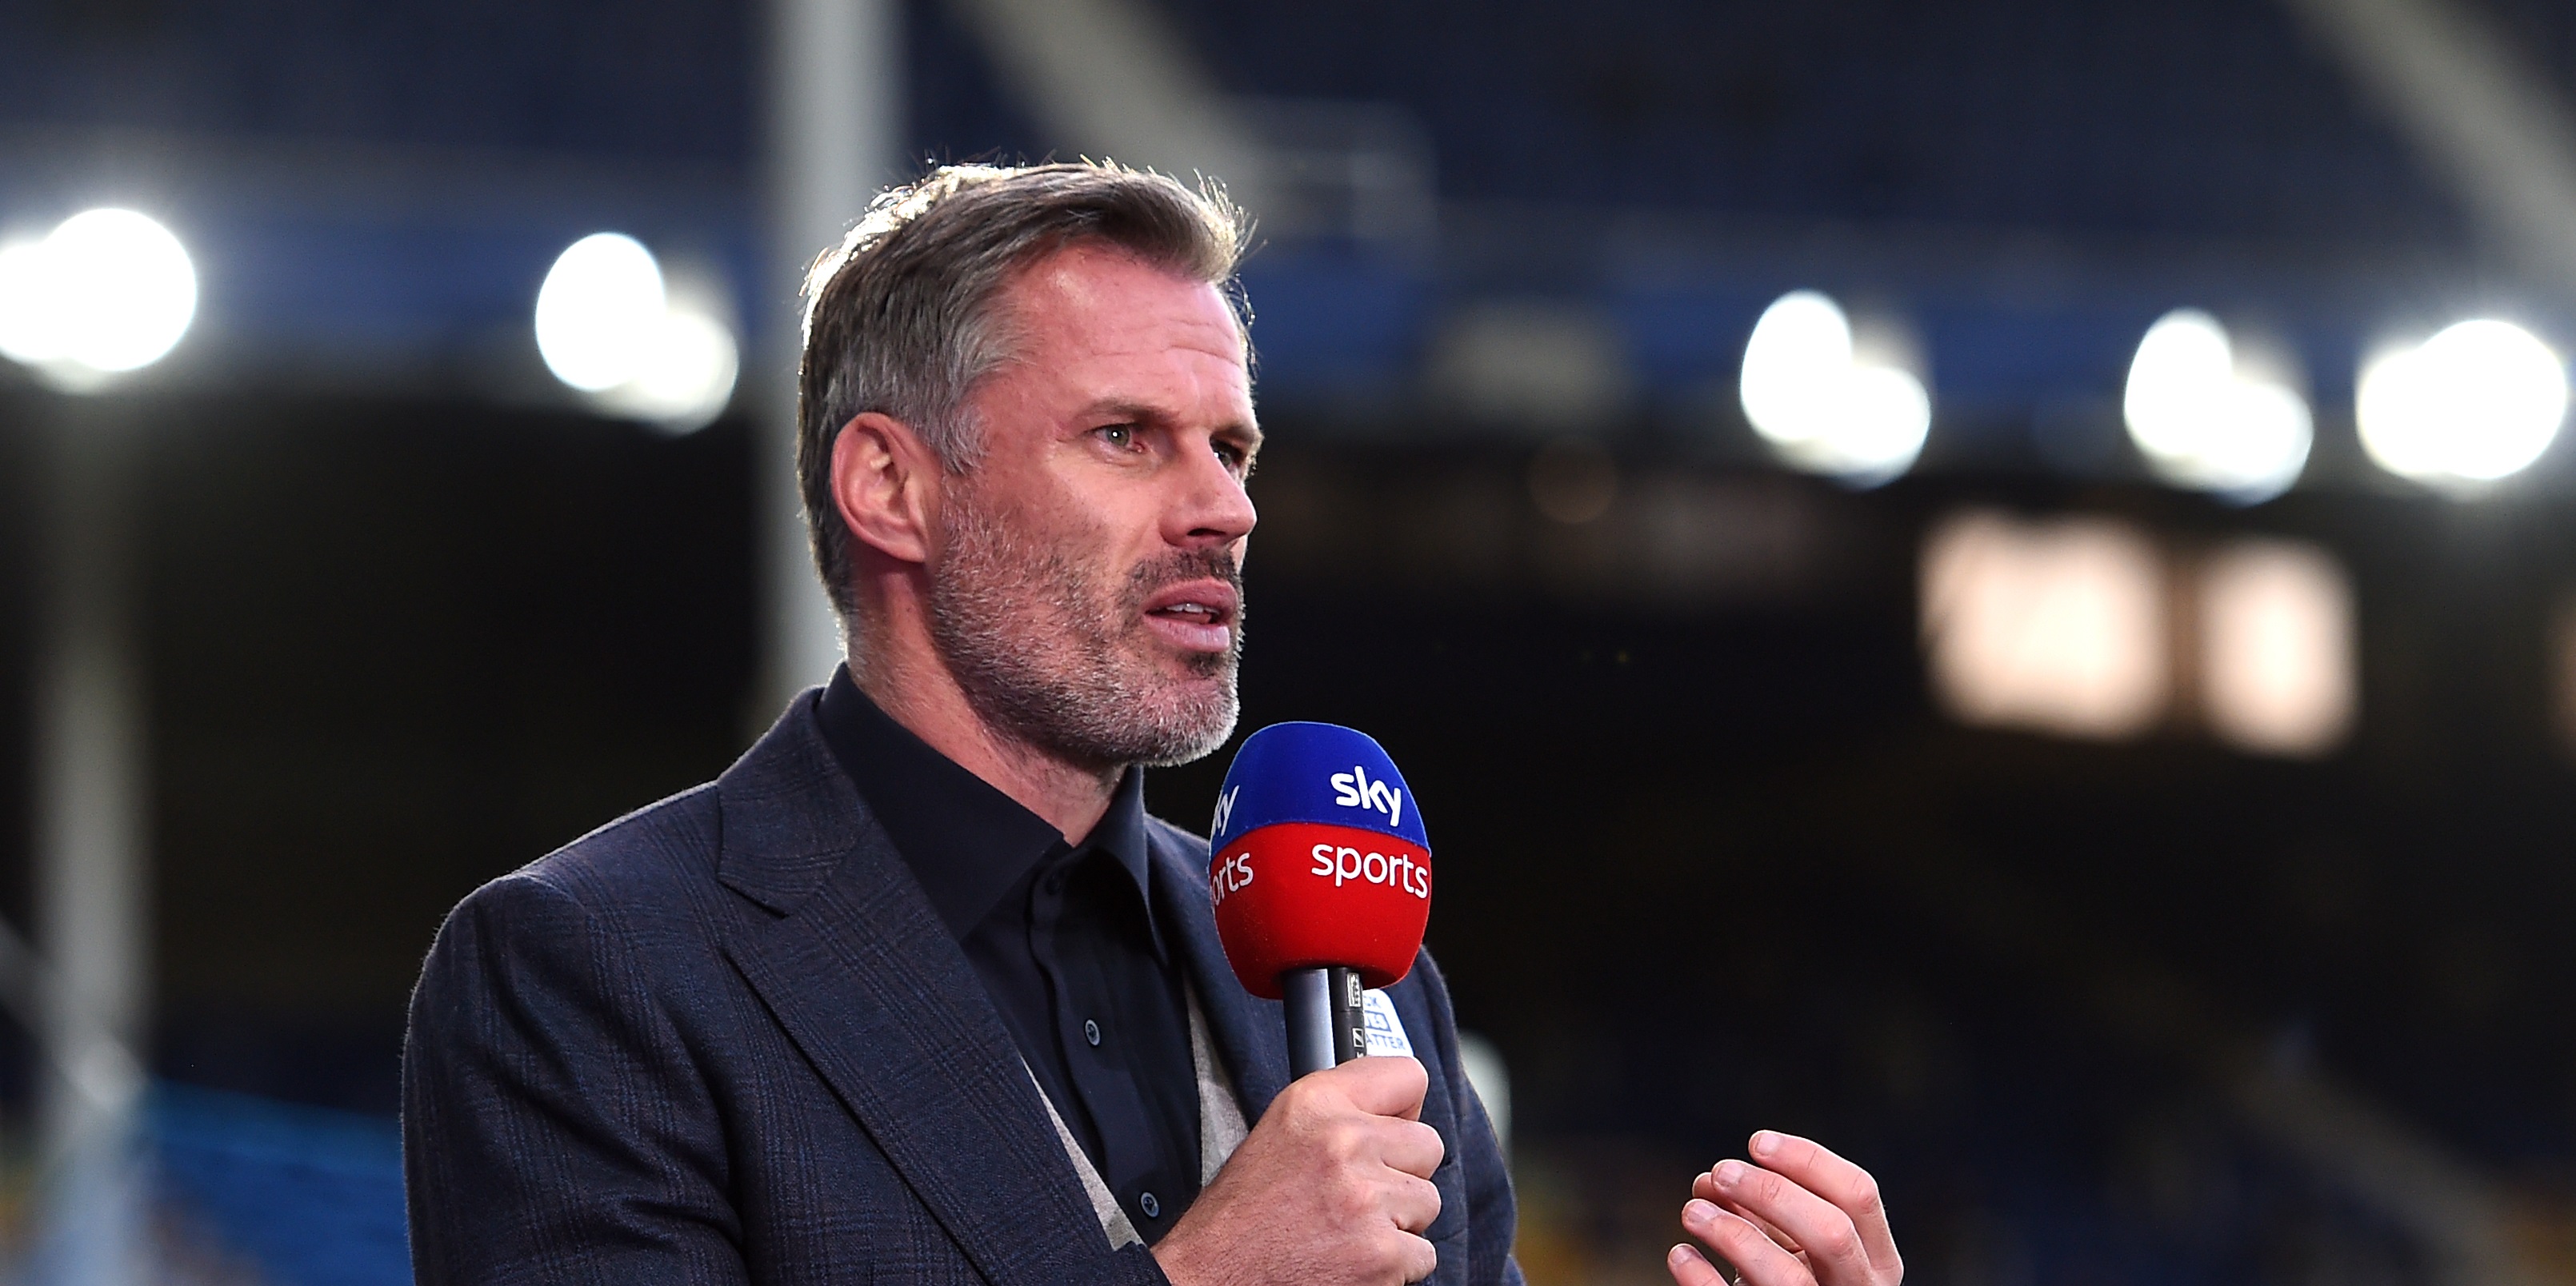 Jamie Carragher admits uncertainty at how Liverpool will adapt to life without Sadio Mane